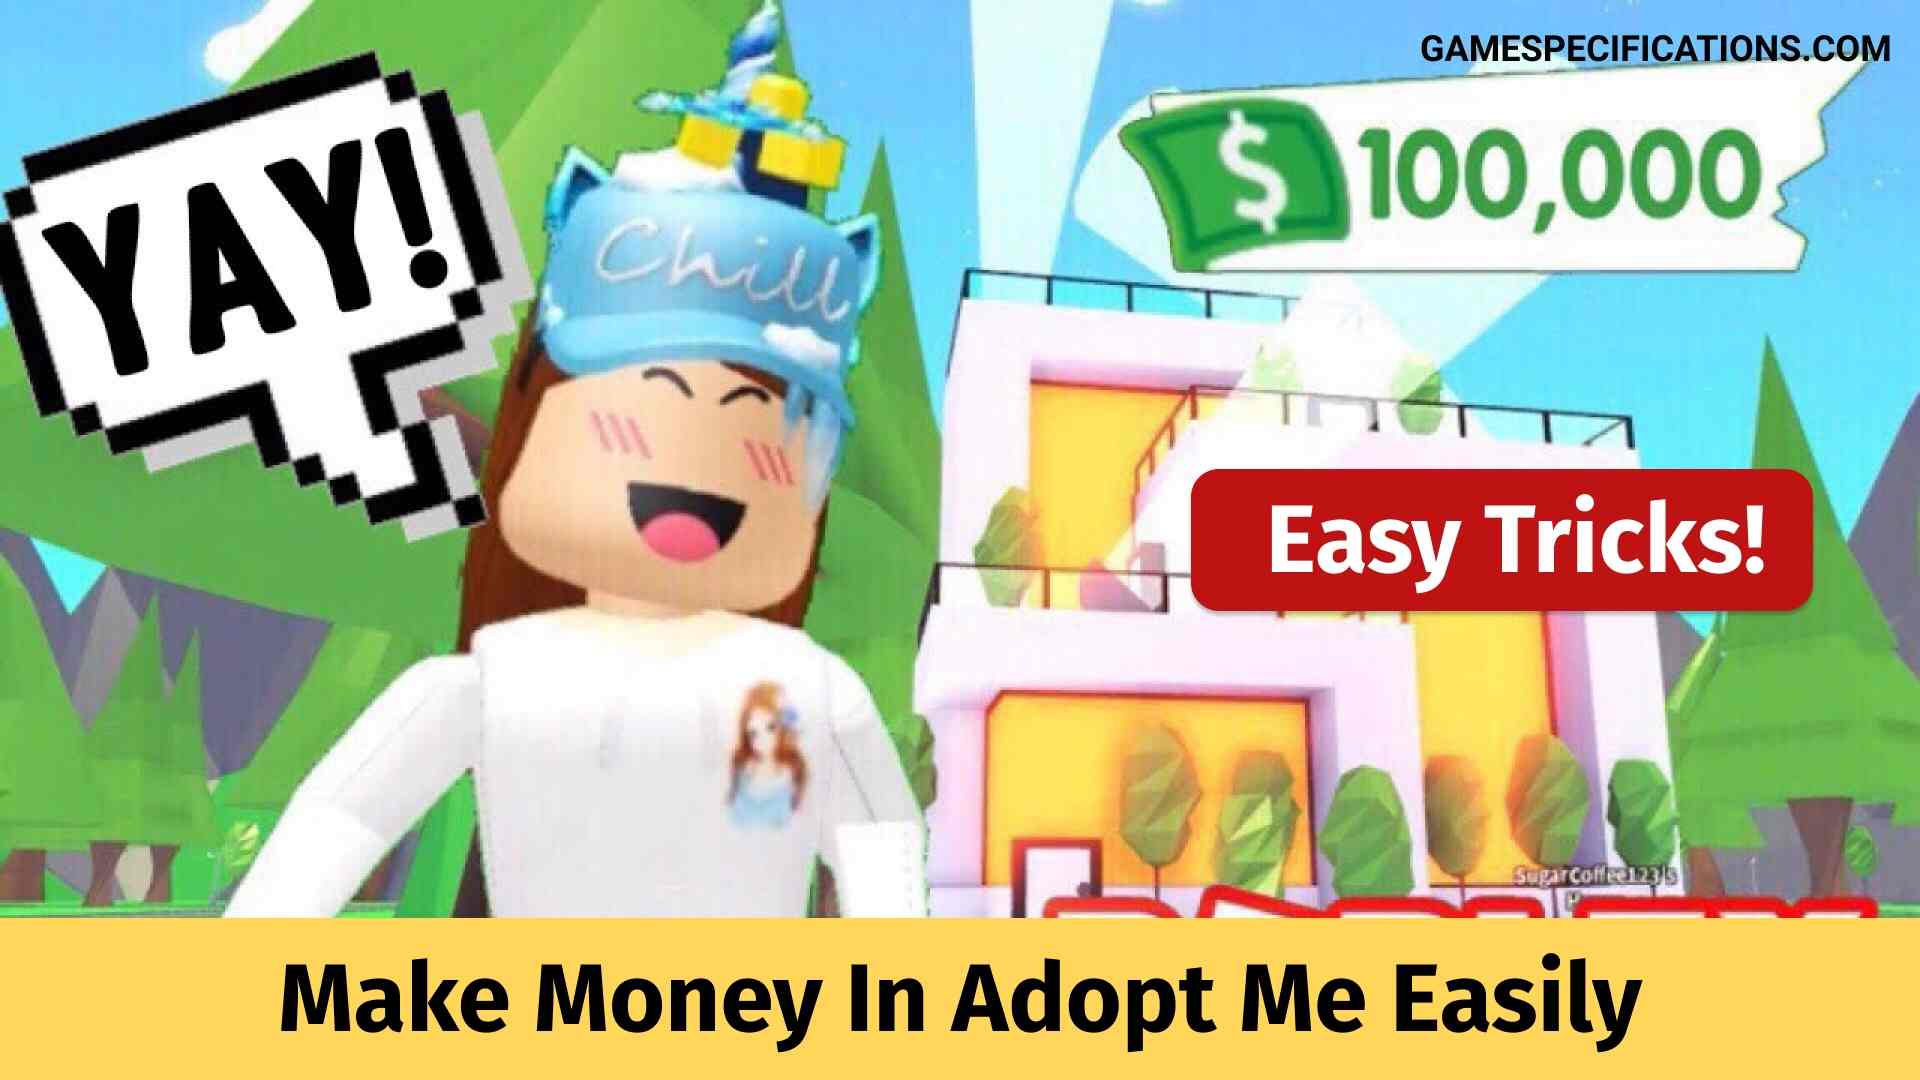 7 Ways To Make Money In Adopt Me Easily Game Specifications - roblox adopt me lemonade stand codes